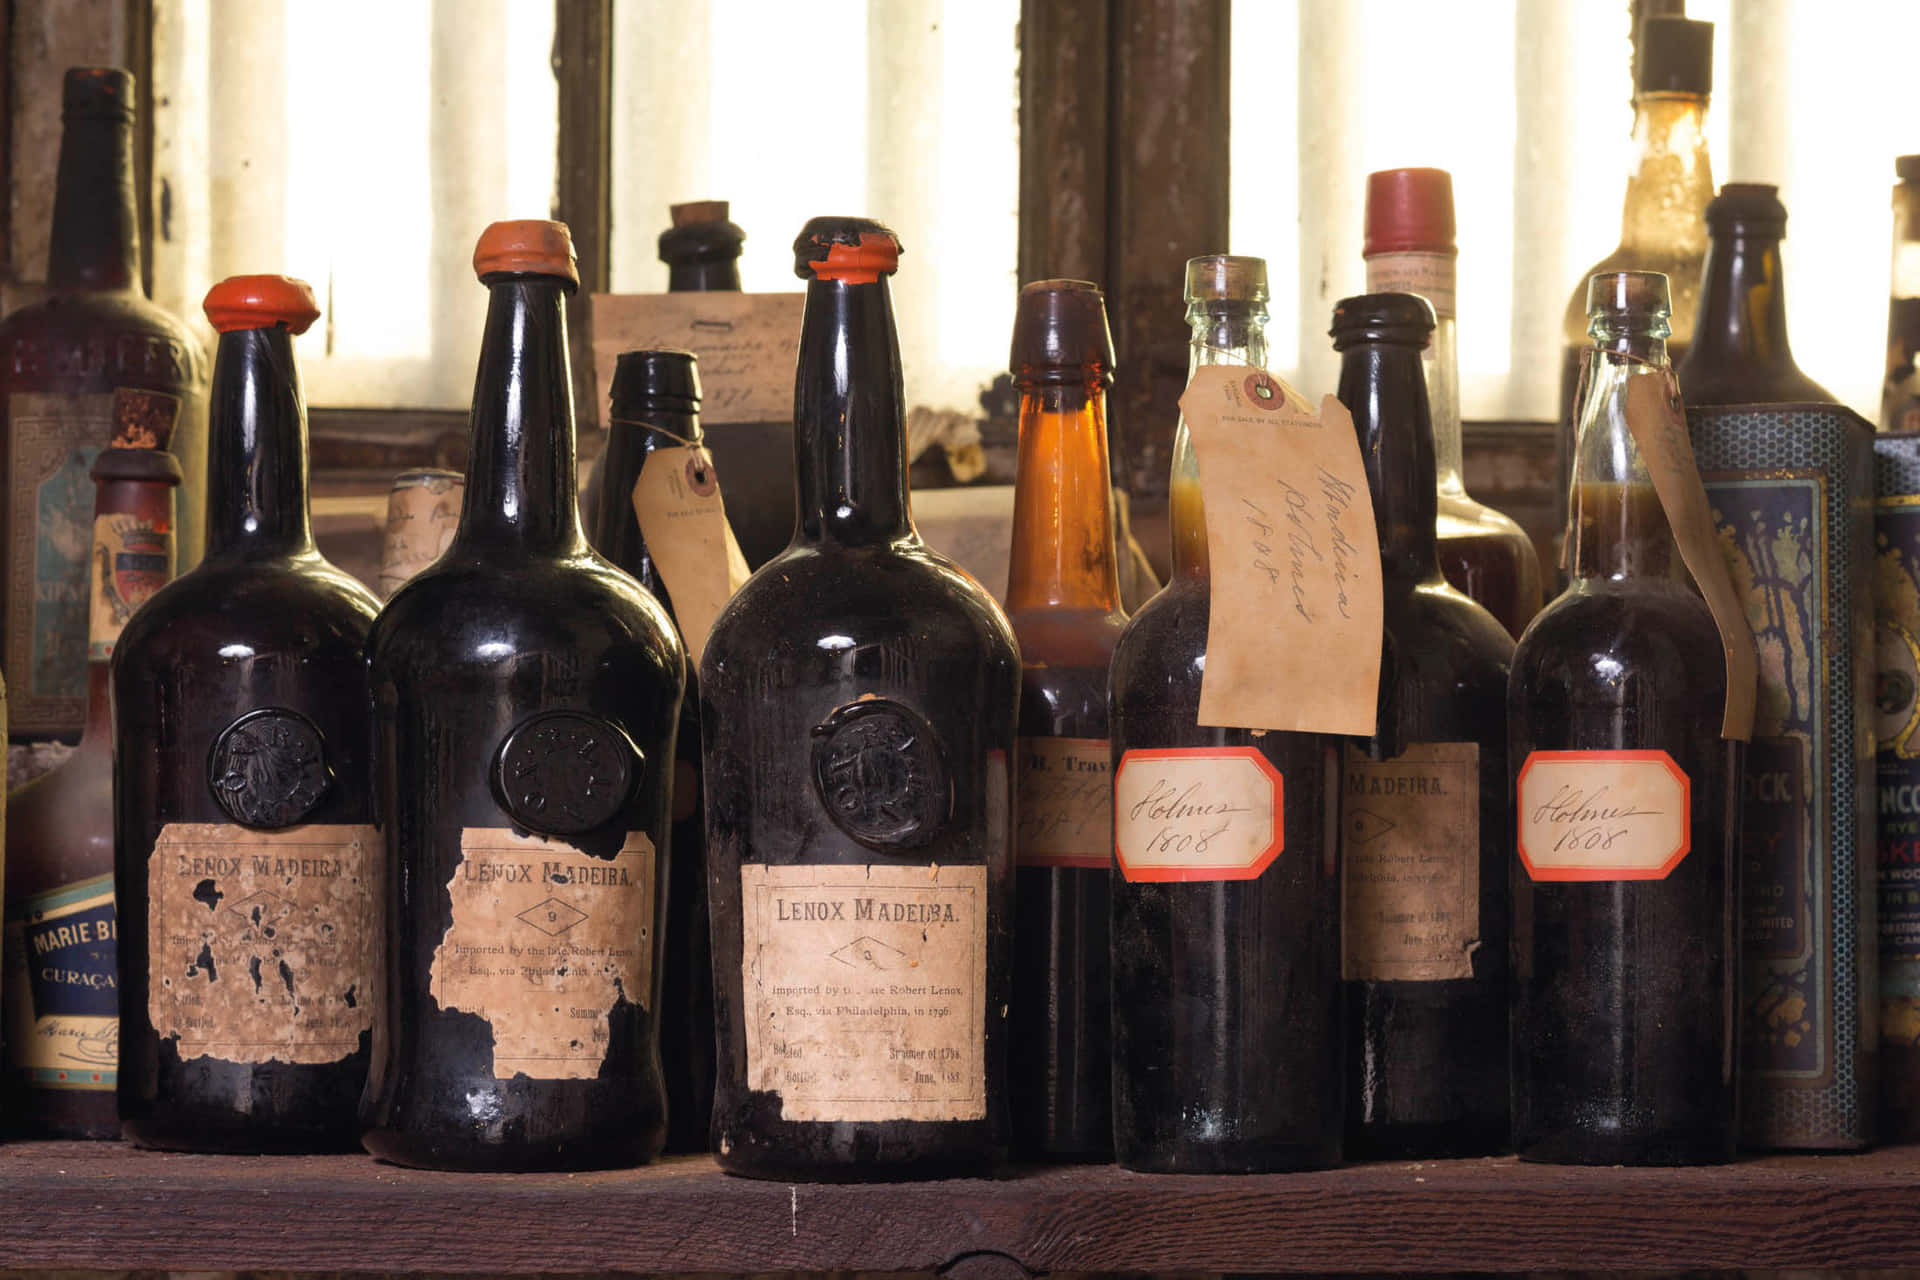 "Old bottles aged by time, beautiful in their own way"